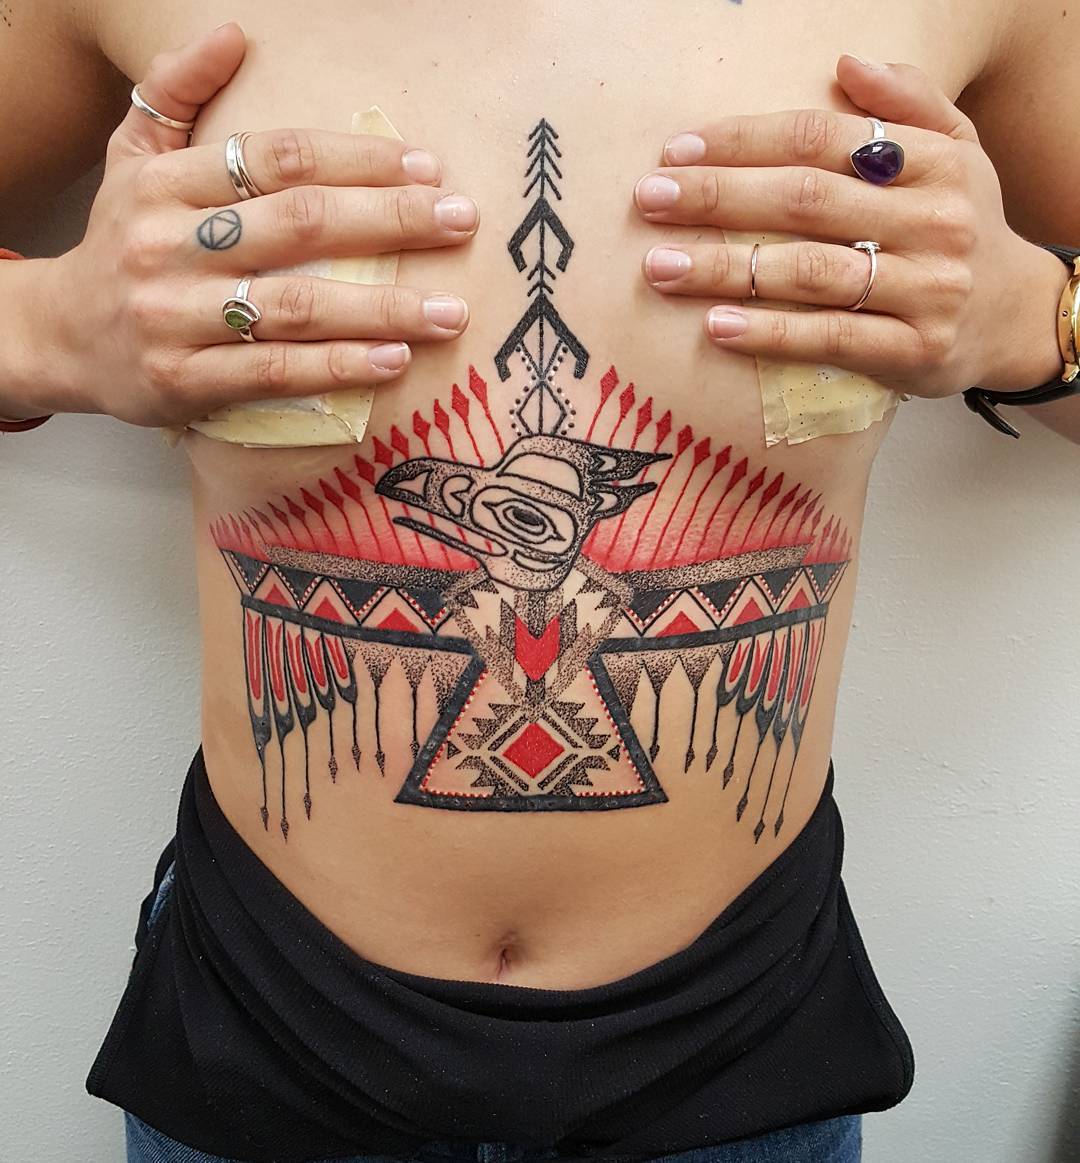 125 Trendy Underboob Tattoos You’ll Need to See - Tattoo Me Now